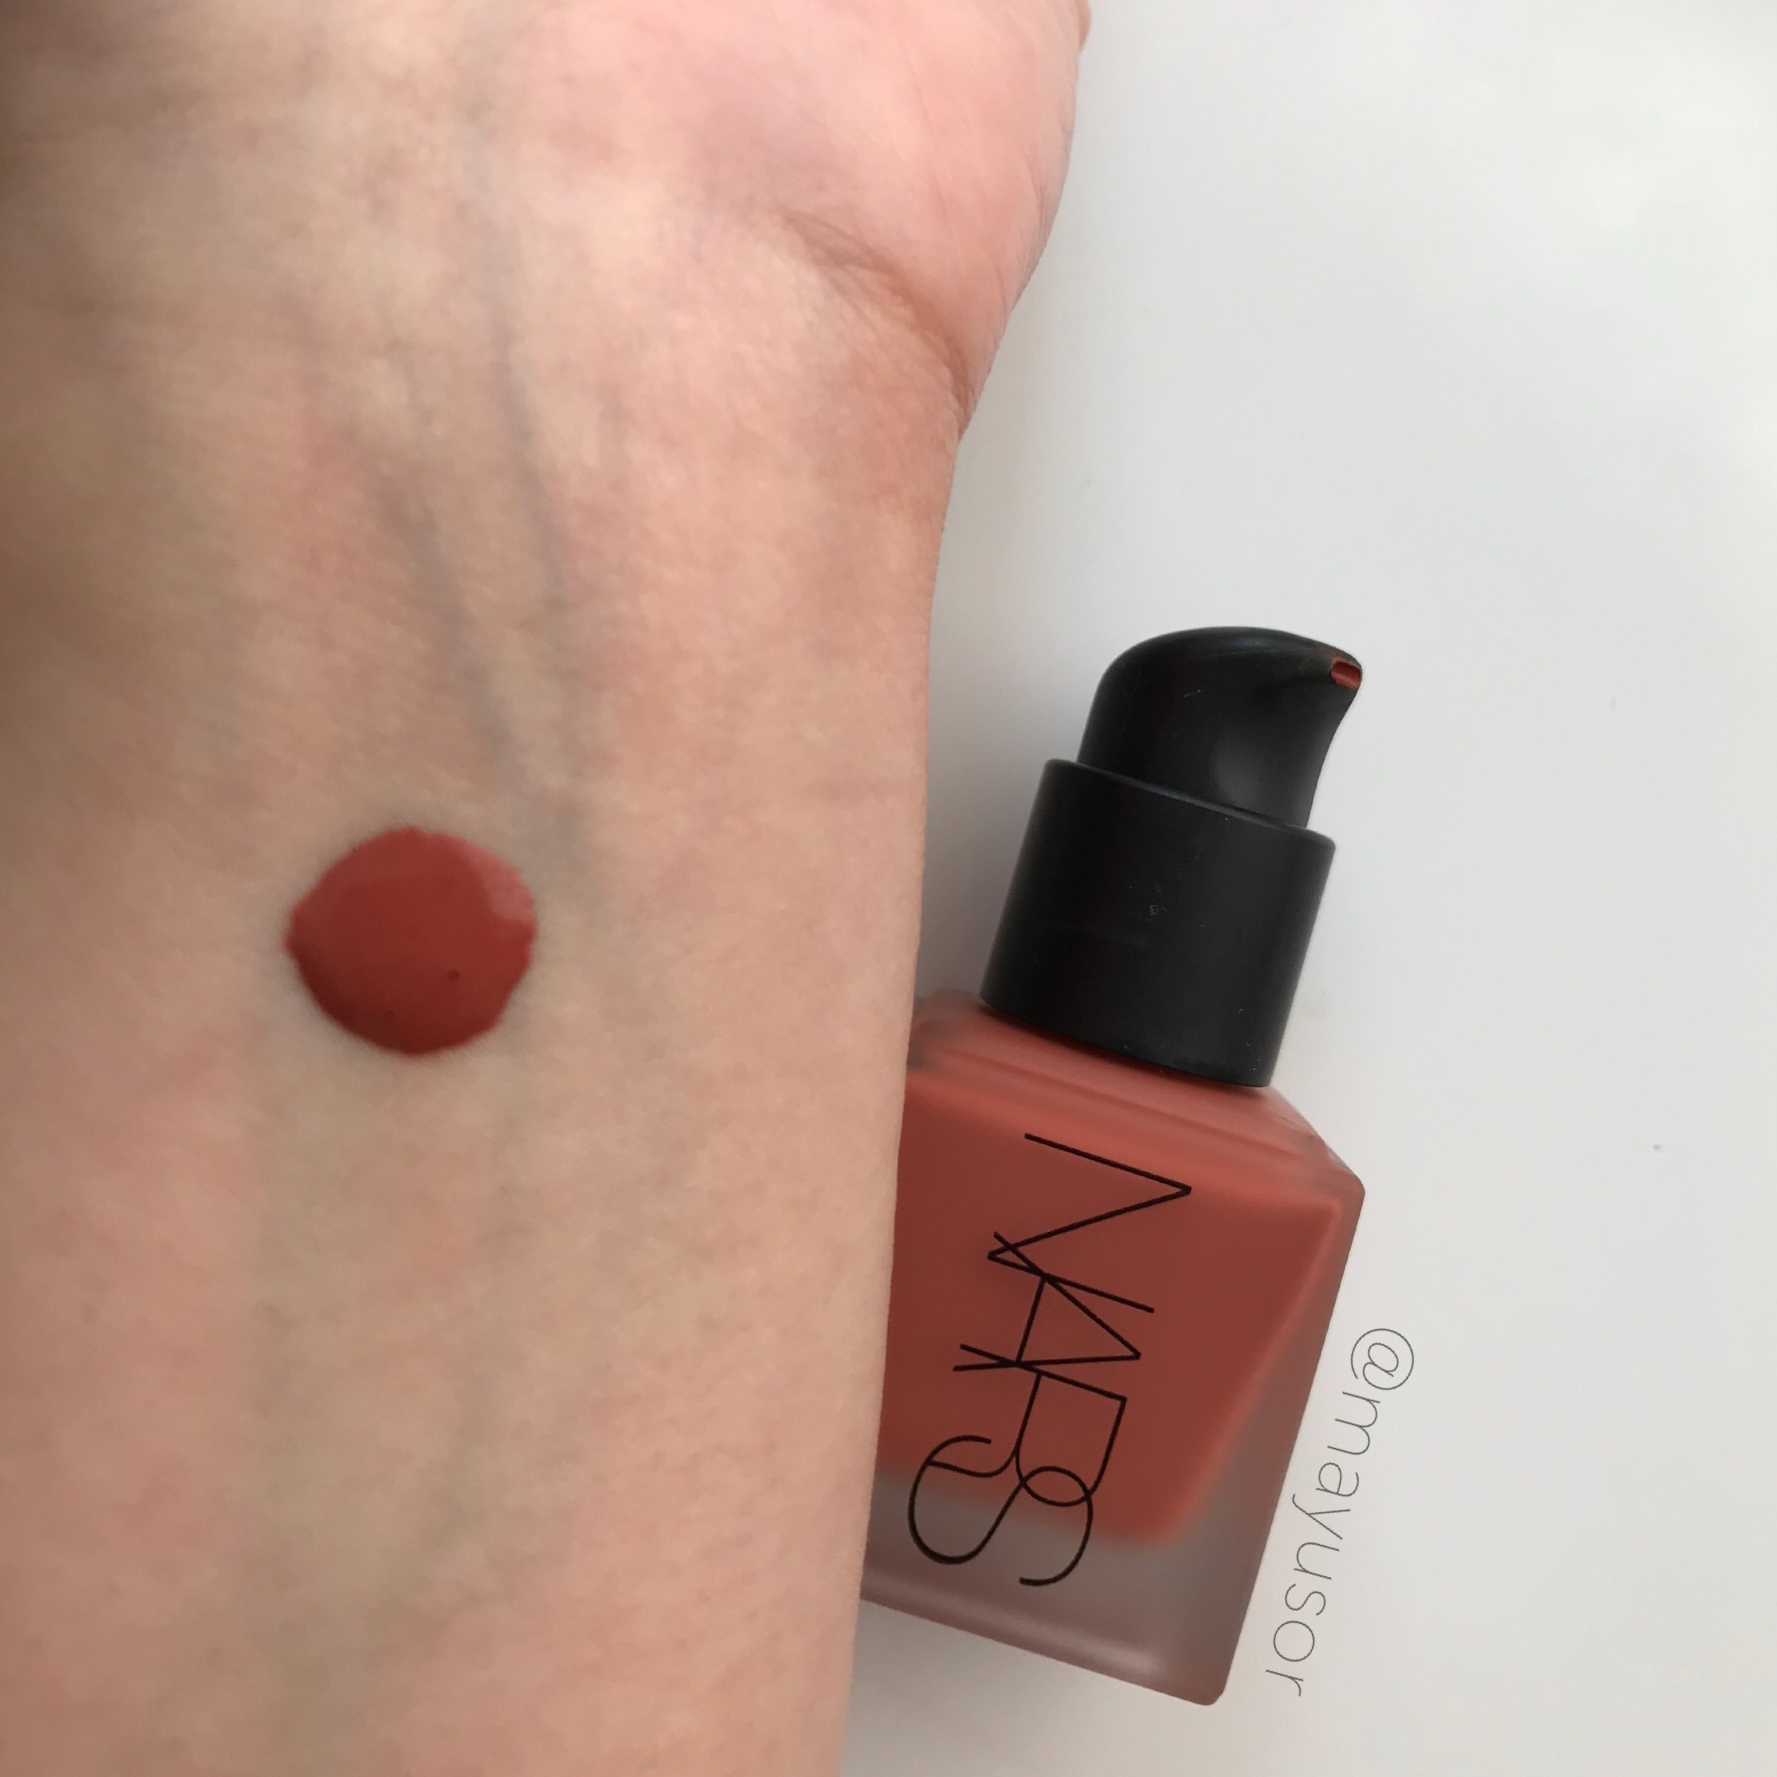 NARS リキッドブラッシュ#5159 HOT TIN ROOF - mayusor